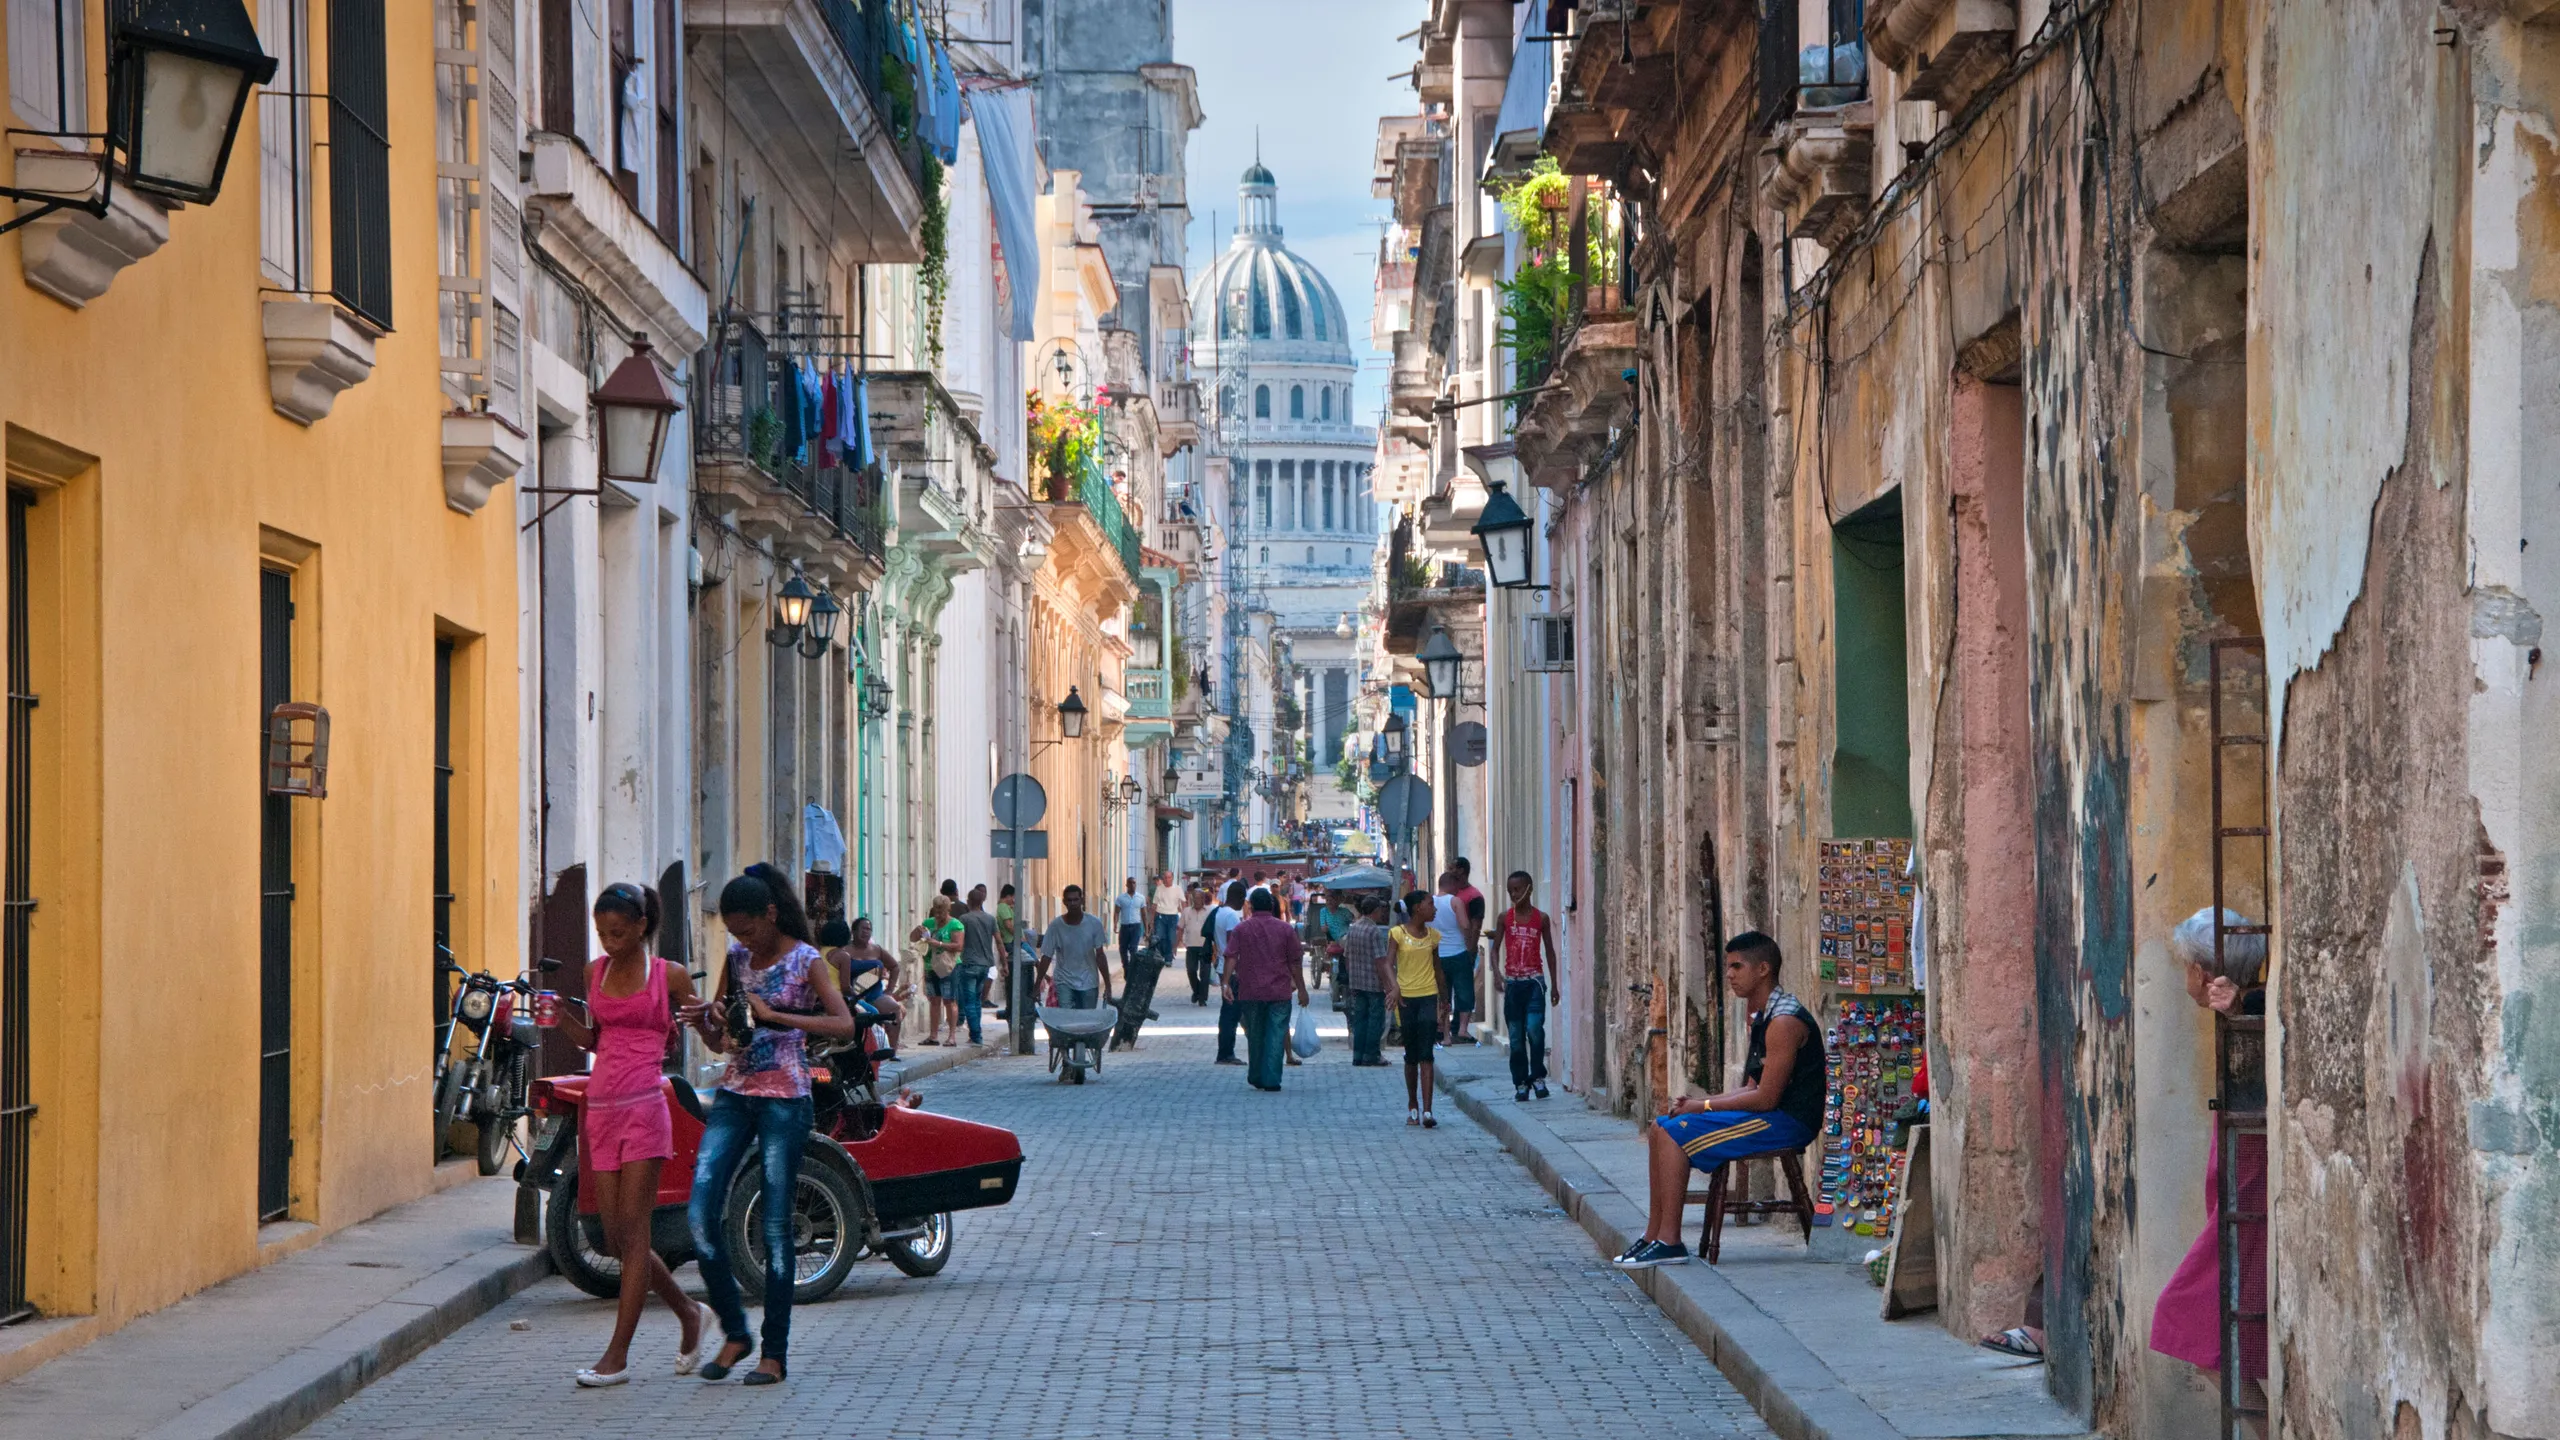 What is the name of the main square in Old Havana?